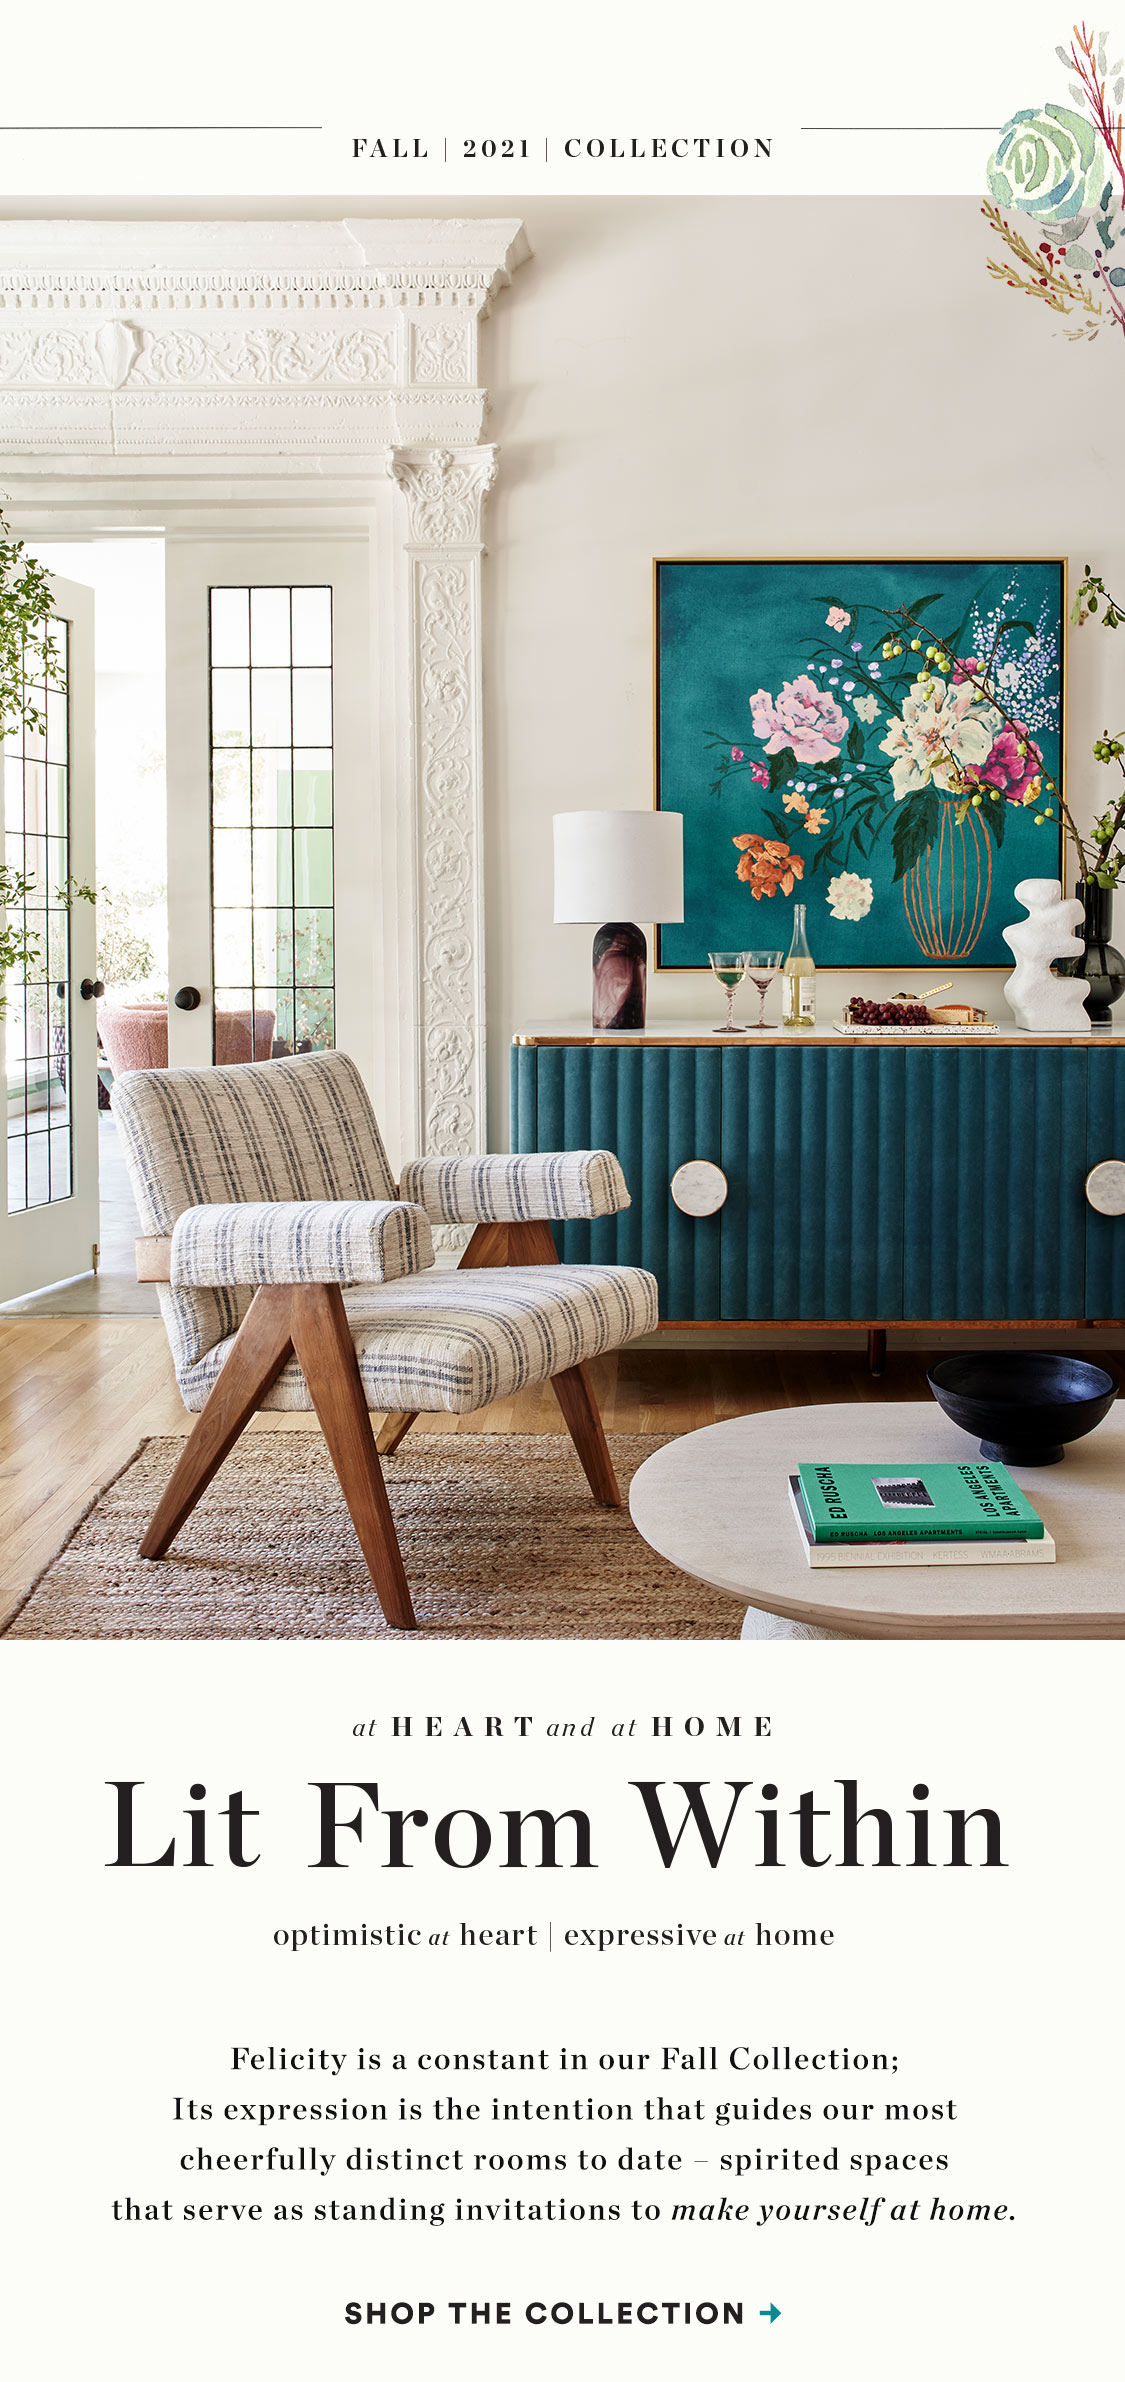 Nordstrom X Anthropologie Home - Styled Snapshots